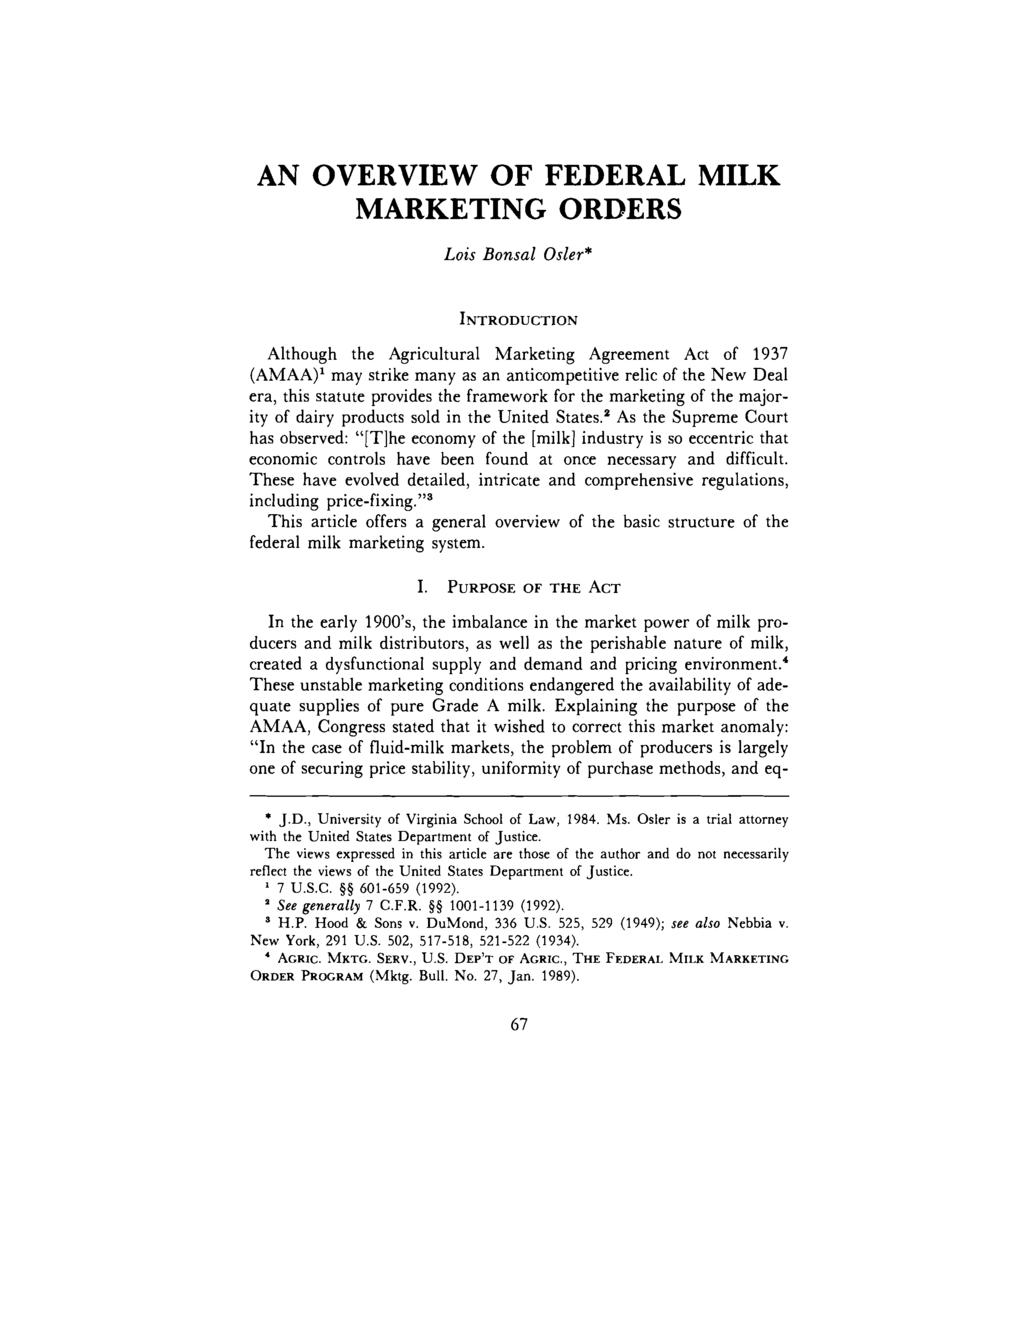 AN OVERVIEW OF FEDERAL MILK MARKETING ORDERS Lois Bansal Osler* INTRODUCTION Although the Agricultural Marketing Agreement Act of 1937 (AMAA)l may strike many as an anticompetitive relic of the New